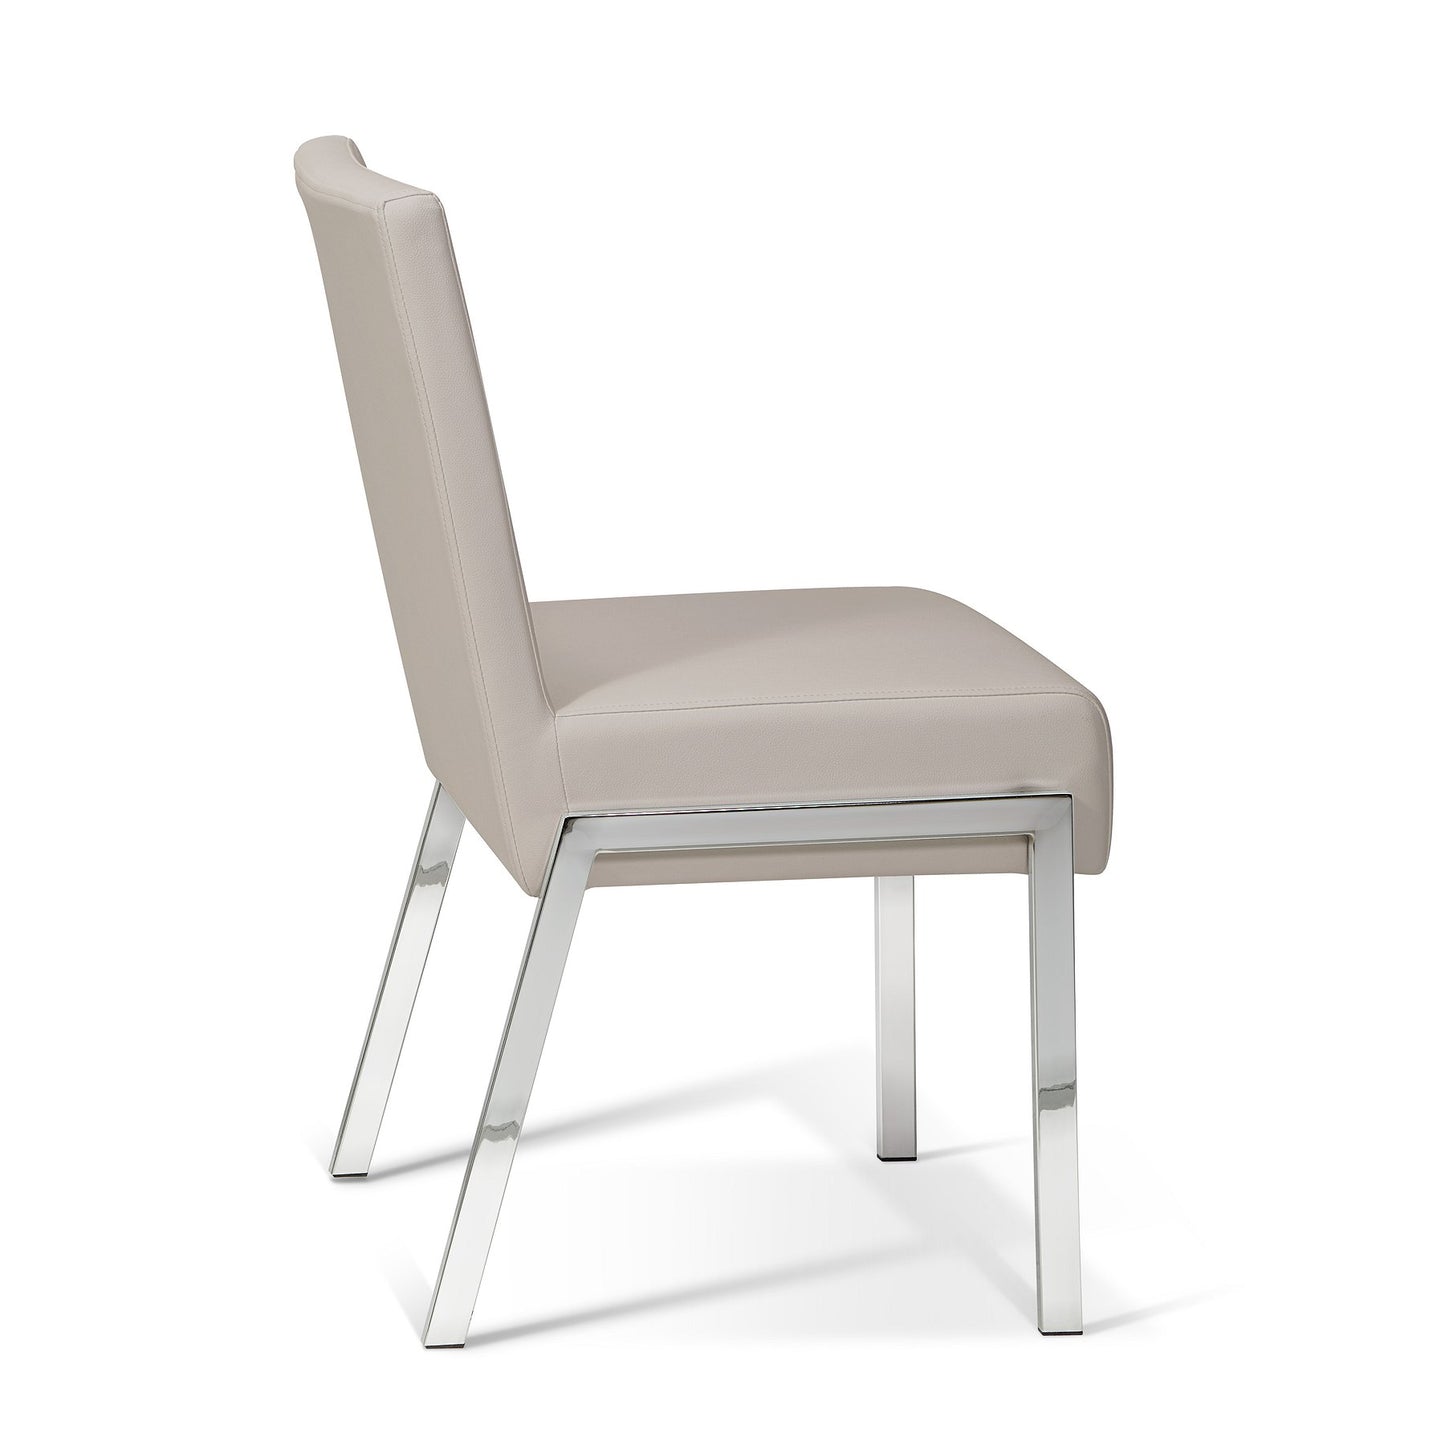 SEF317180 corry - dining chair - Dreamart Gallery